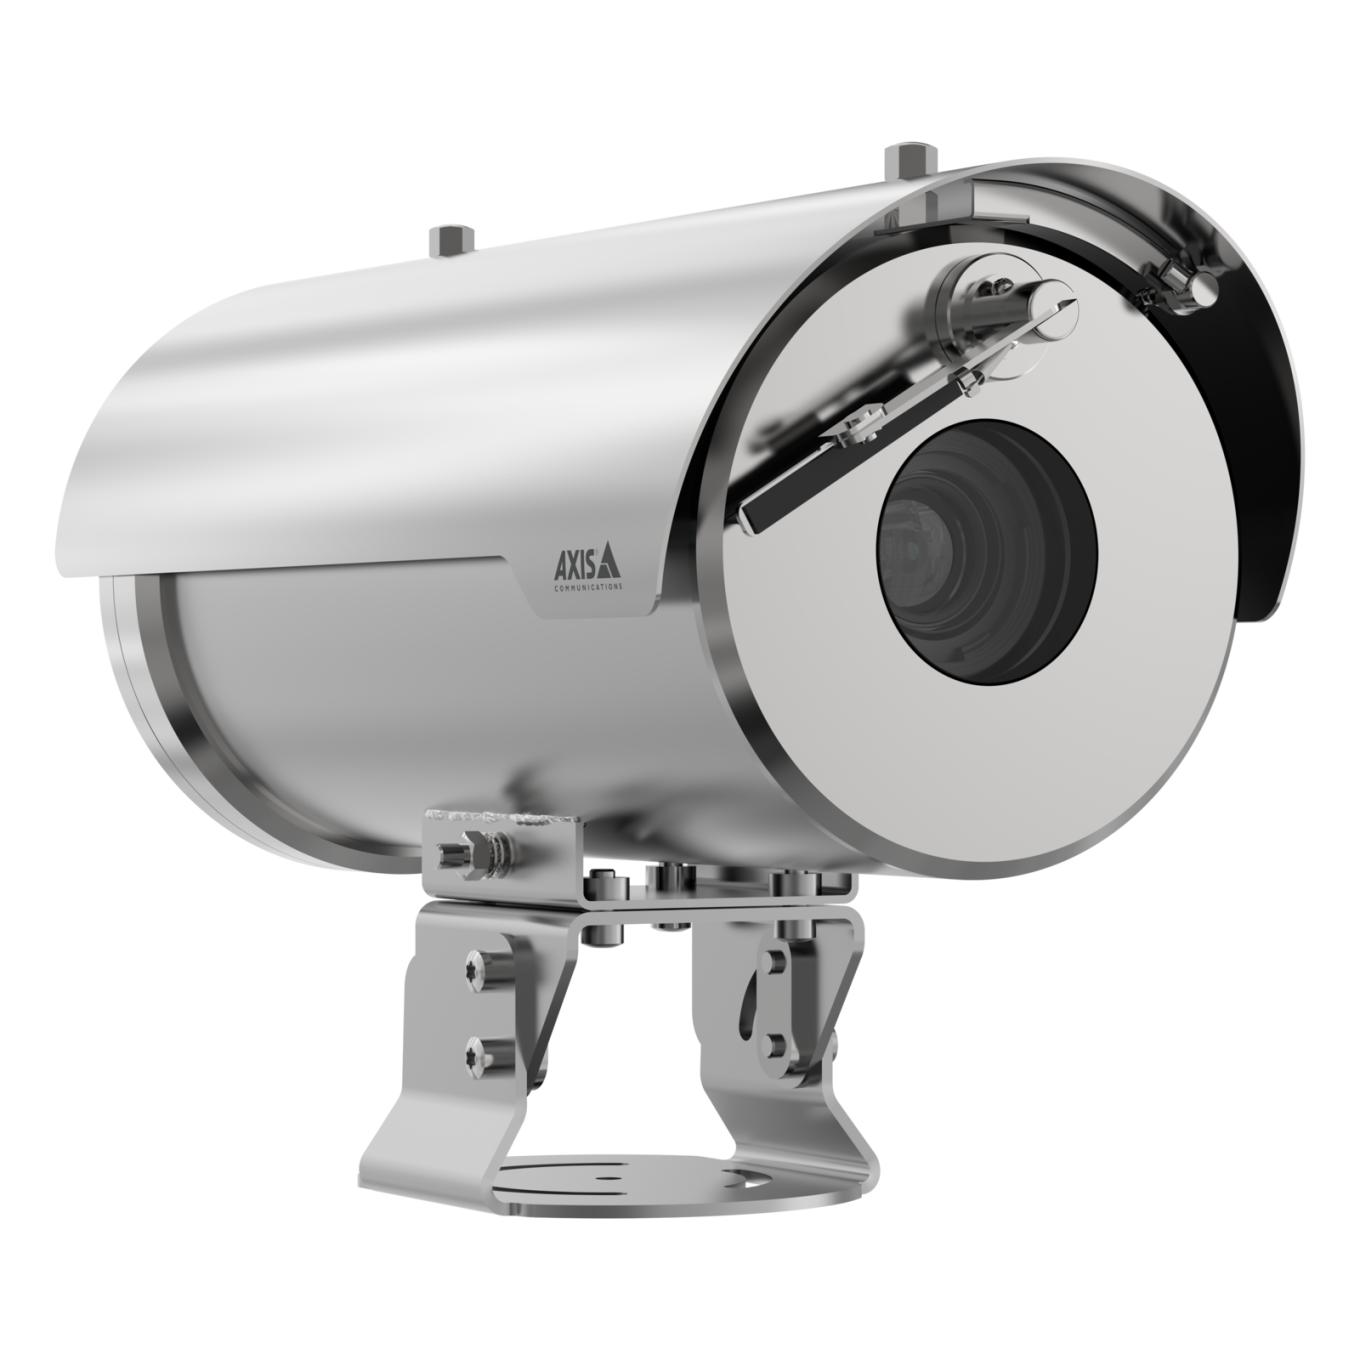 AXIS XFQ1656 Explosion-Protected Camera | Axis Communications